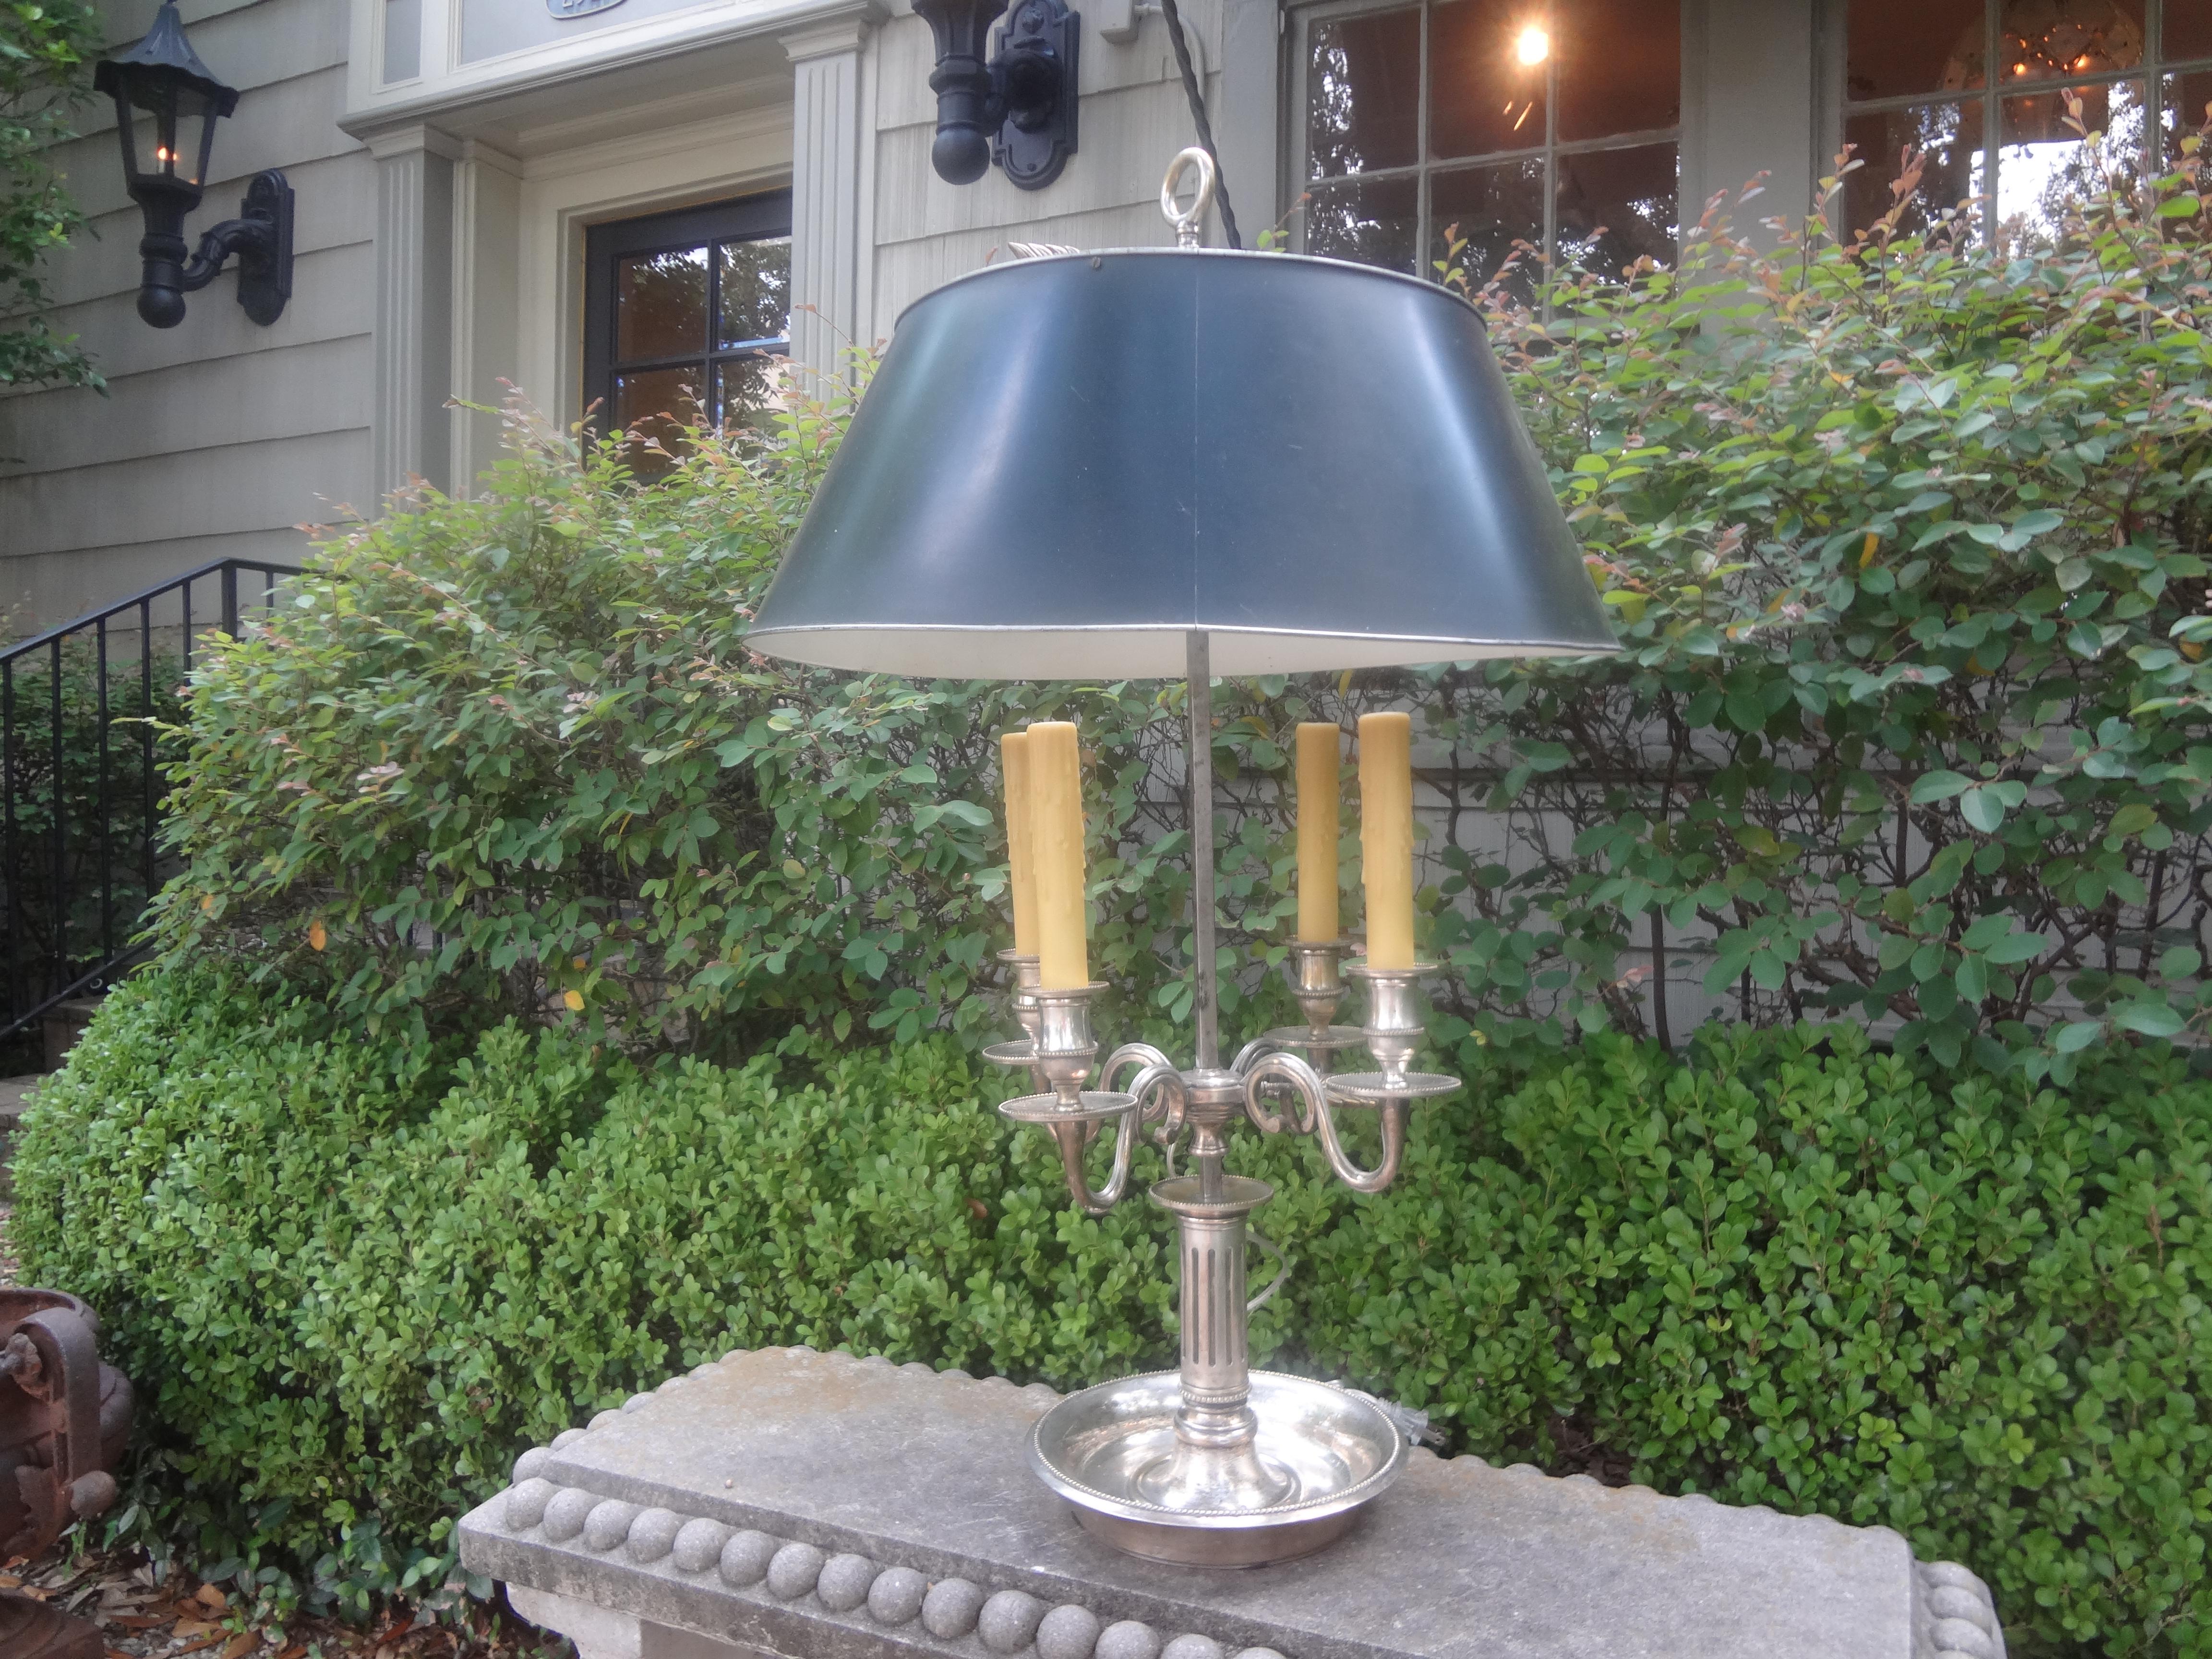 Monumental 19th Century French Louis XVI Style Bouillotte Lamp.
This stunning antique French Louis XVI style silvered bronze bouillotte lamp or desk lamp with four lights and a black tole shade has been newly French wired with new sockets for the